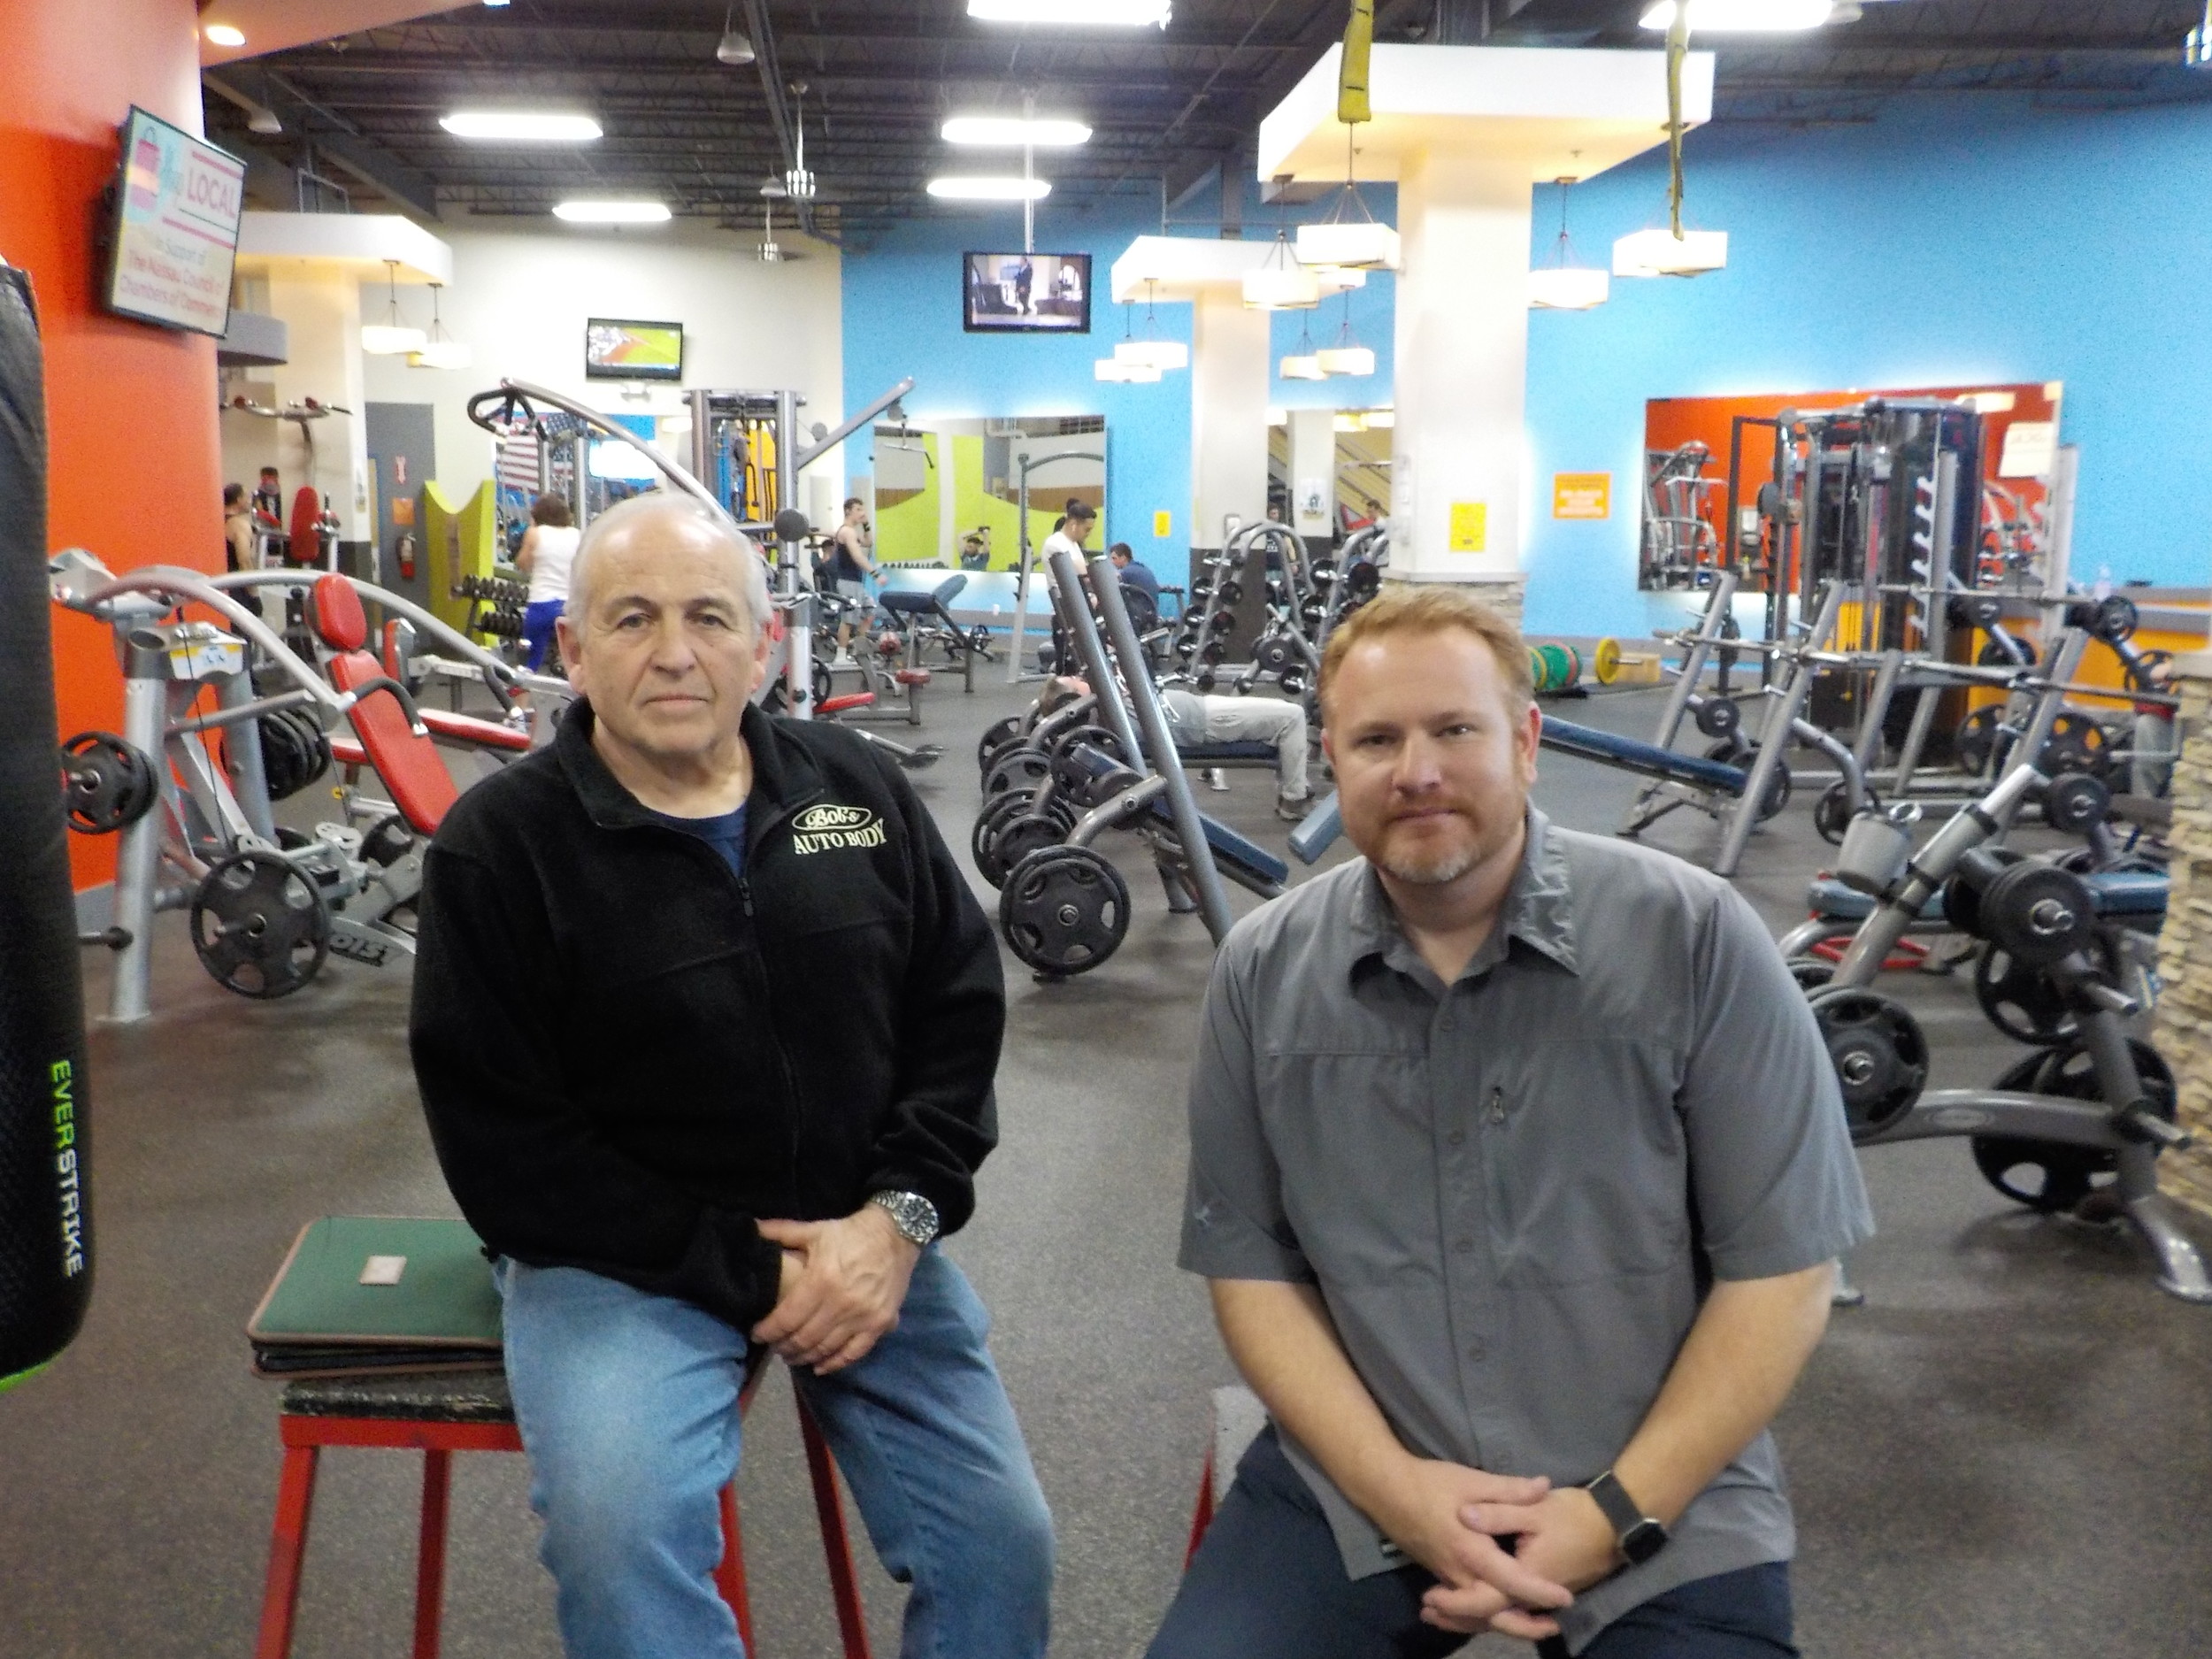 ROK Health & Fitness owners Robert D’Urso, left, and Mike Hawksby decided to give back to their members in  the form of rebate checks while celebrating their gym’s fifth anniversary.